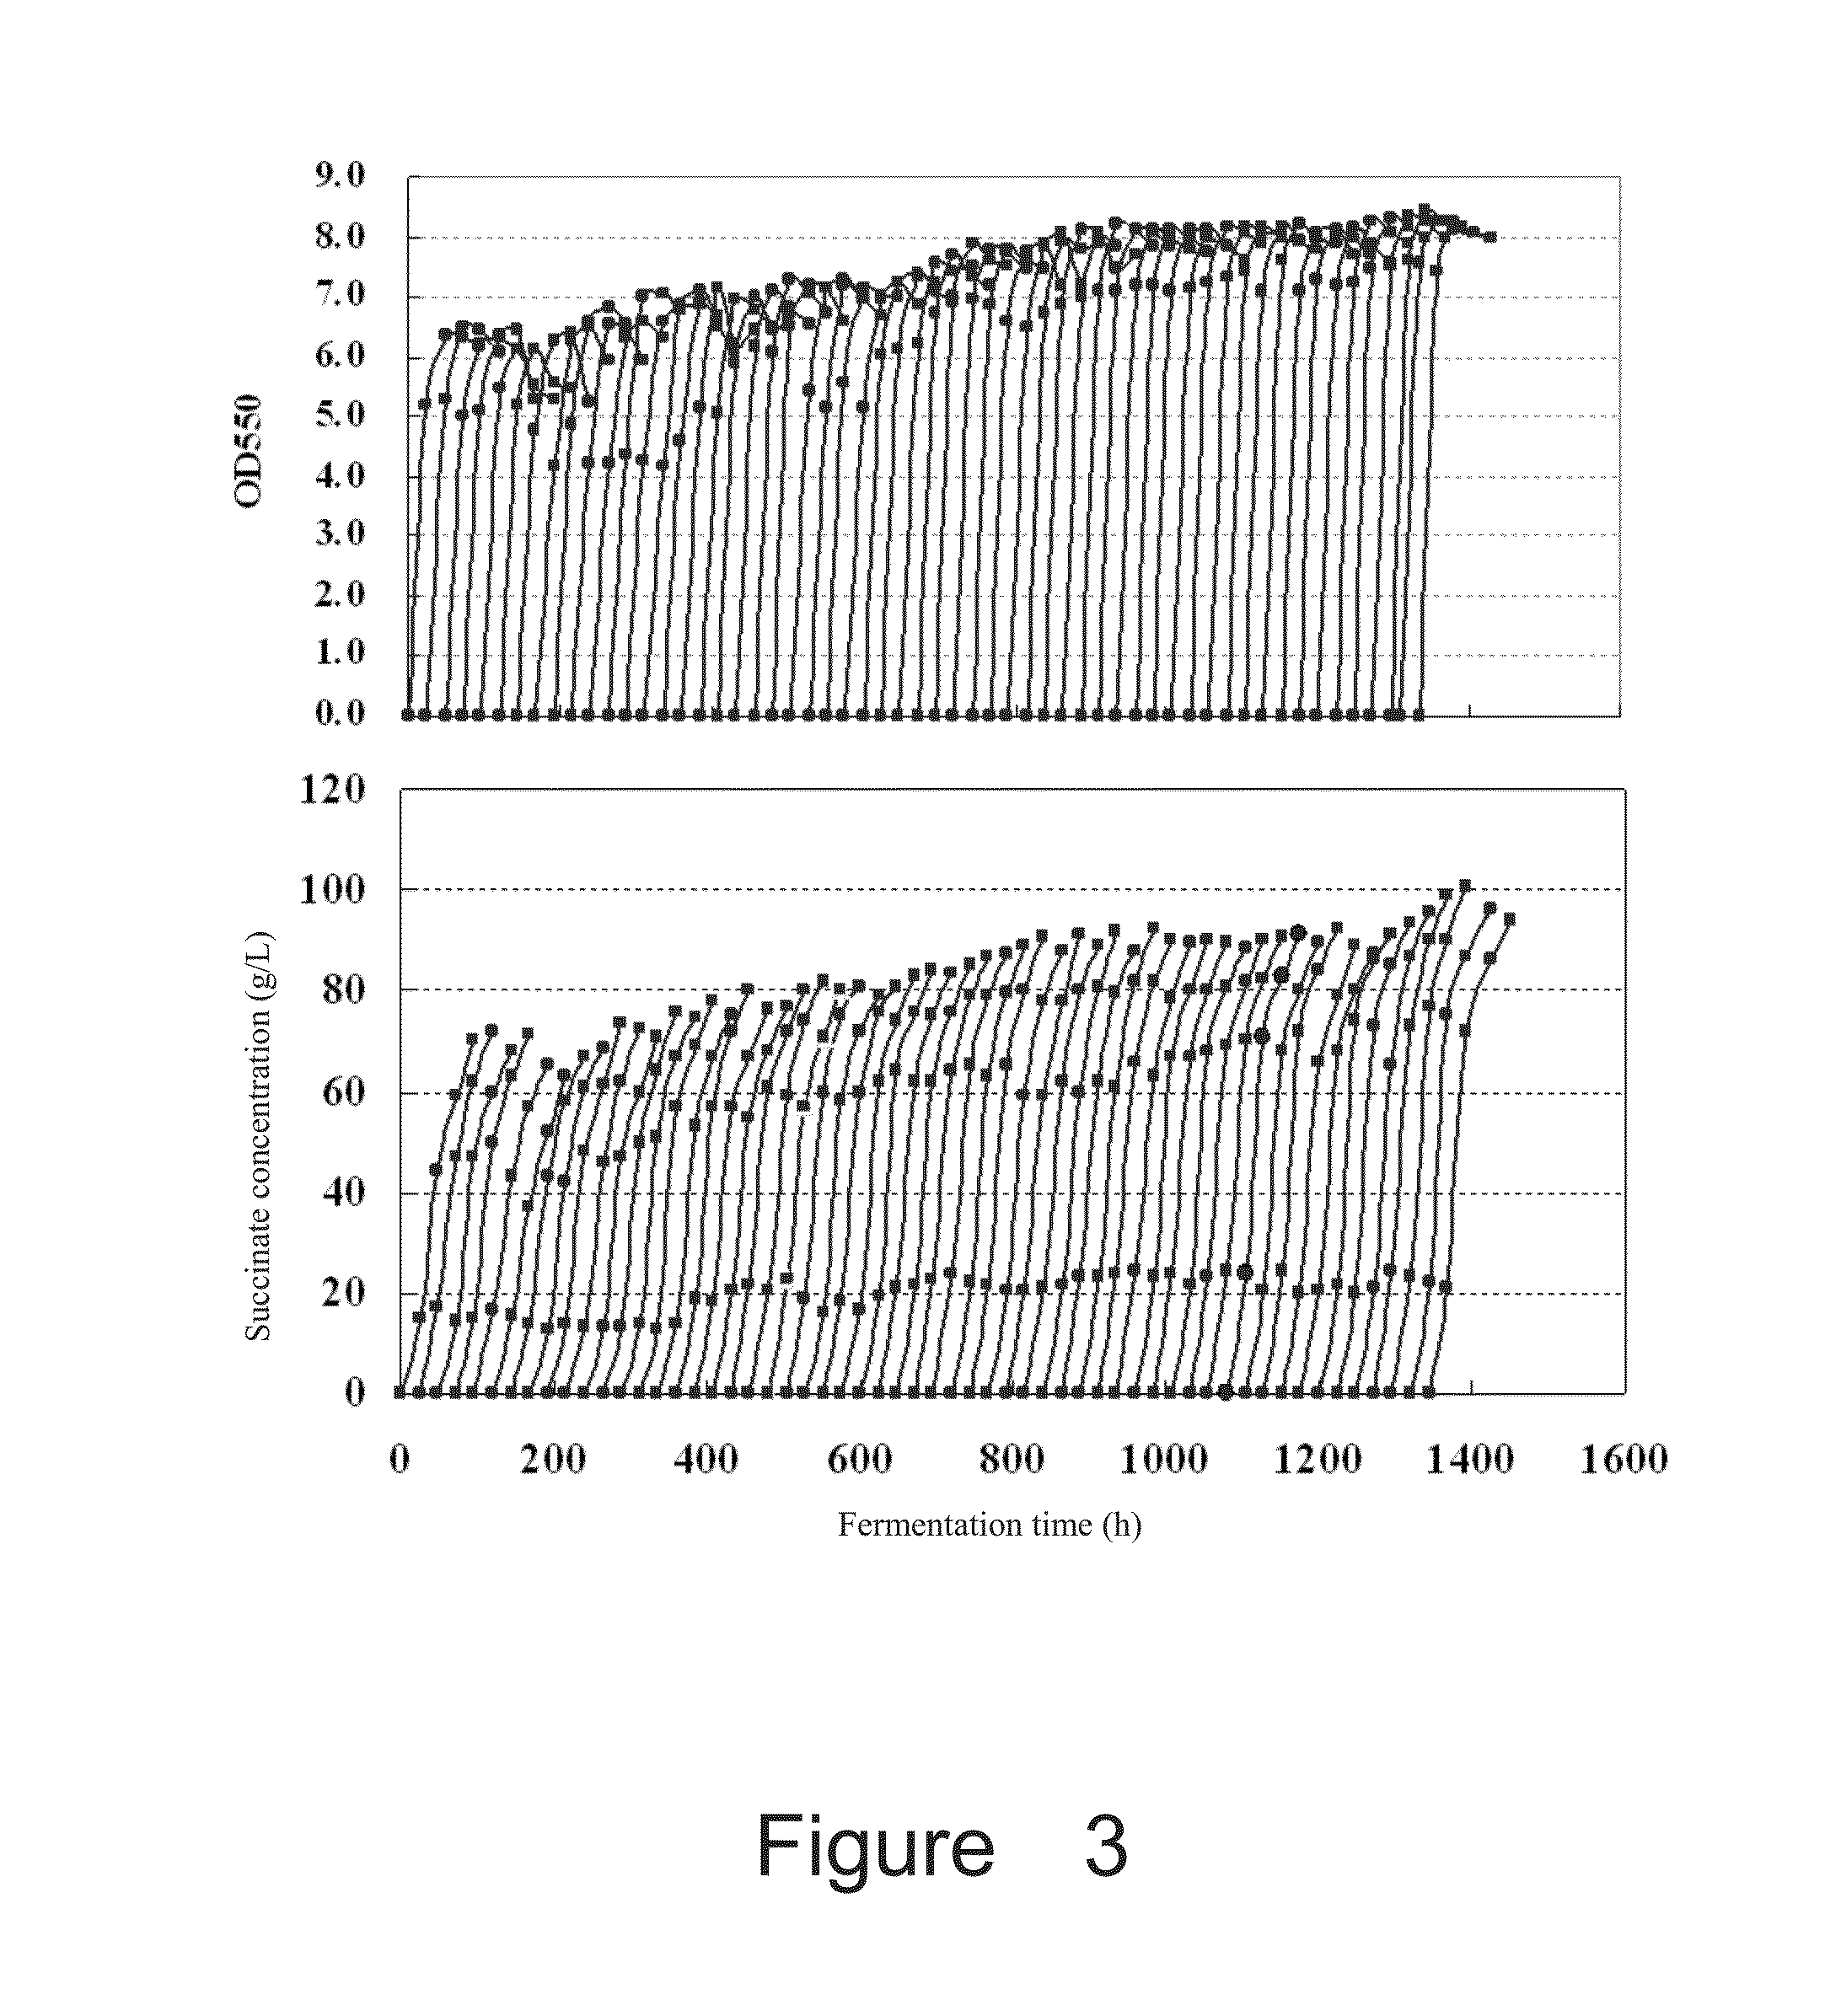 Recombinant escherichia coli for producing succinic acid and application thereof